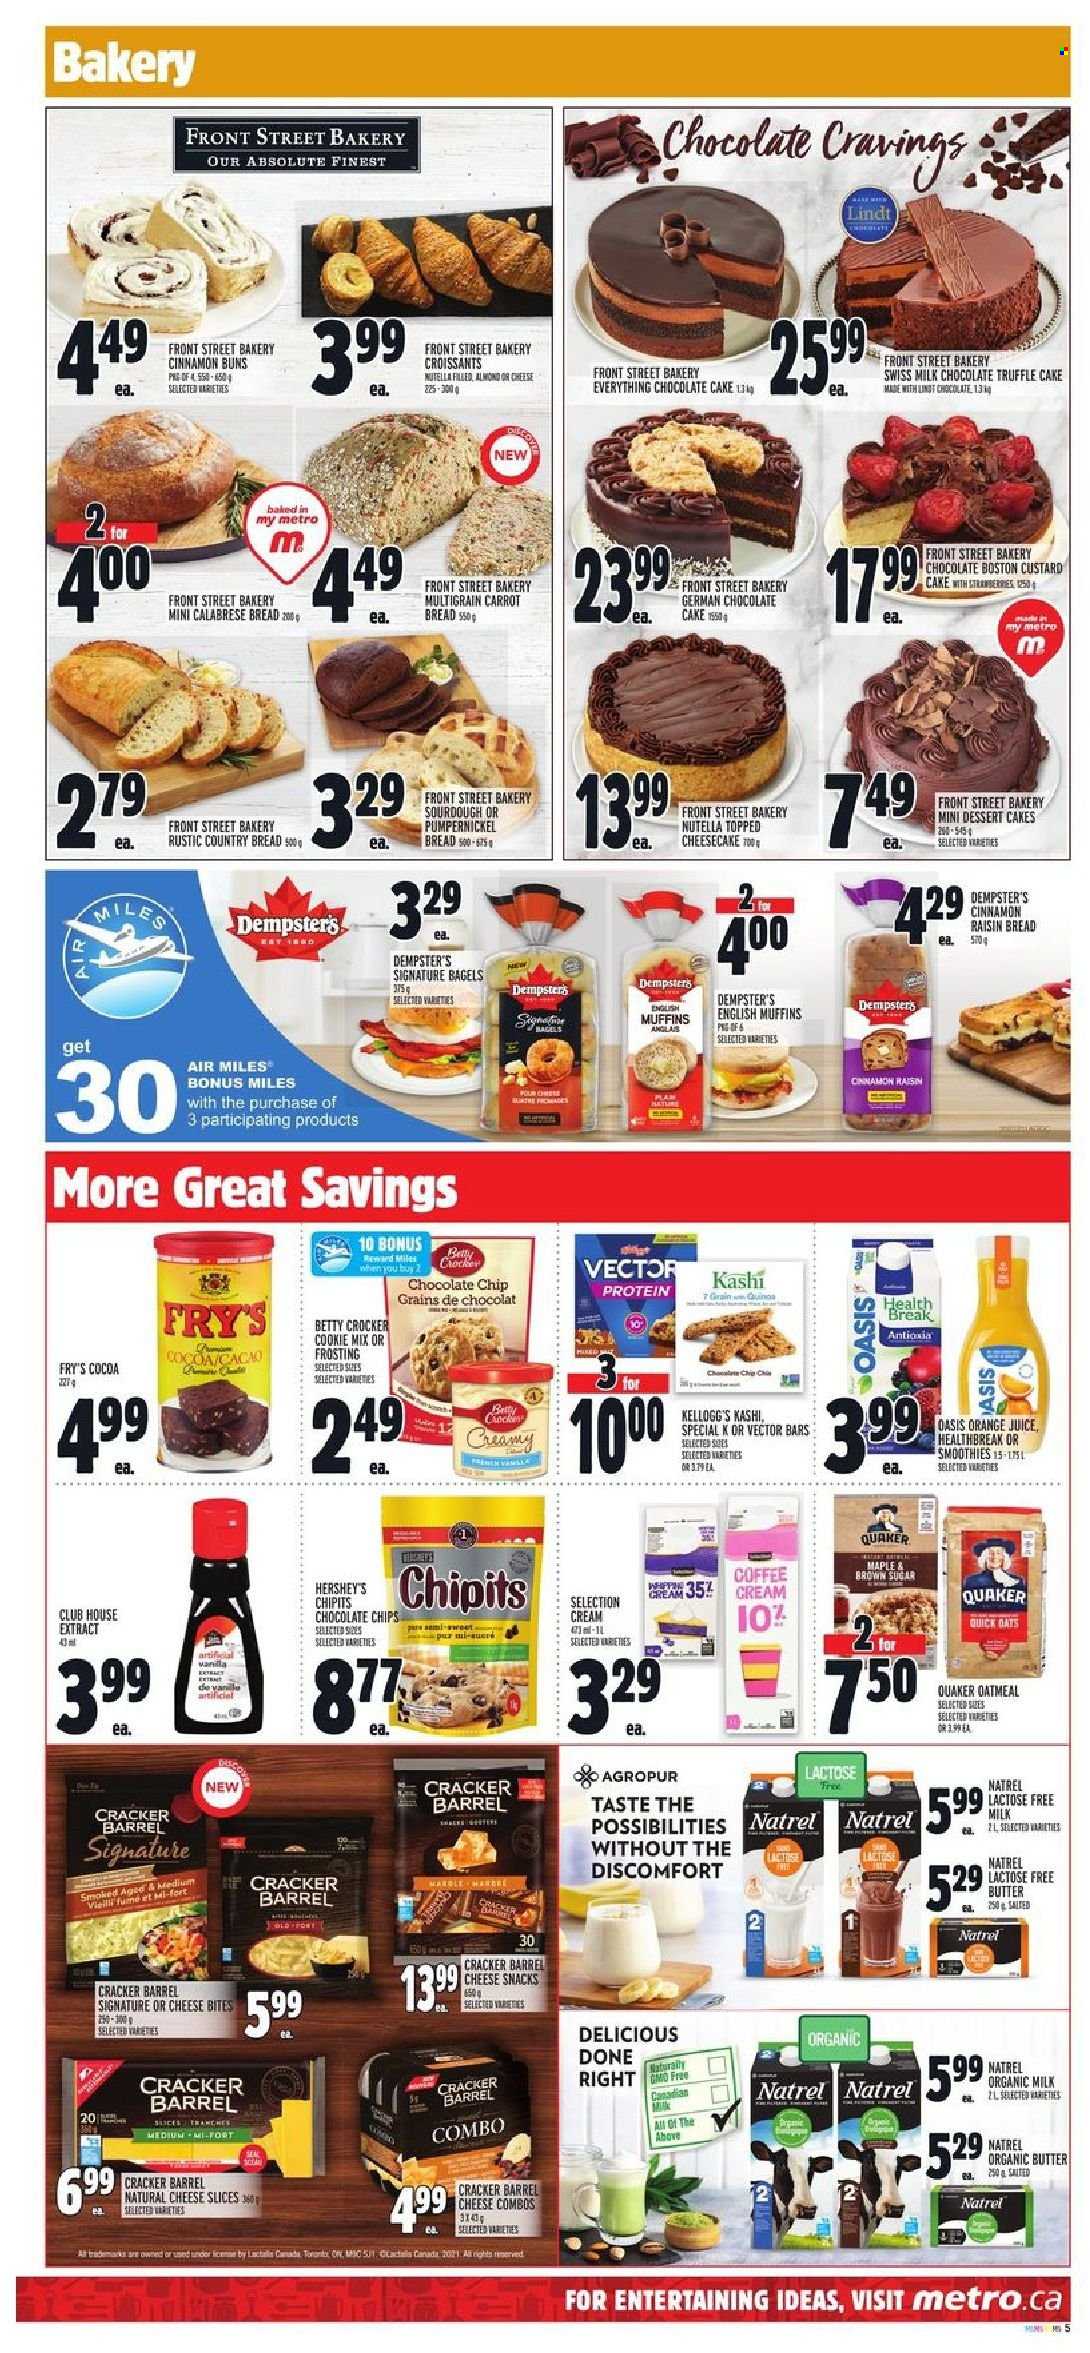 thumbnail - Metro Flyer - September 09, 2021 - September 15, 2021 - Sales products - bagels, bread, english muffins, cake, croissant, buns, cheesecake, custard cake, chocolate cake, Quaker, sliced cheese, organic milk, lactose free milk, butter, Hershey's, milk chocolate, snack, truffles, crackers, Kellogg's, frosting, oatmeal, orange juice, juice, coffee, Absolute, Nutella, Lindt. Page 6.